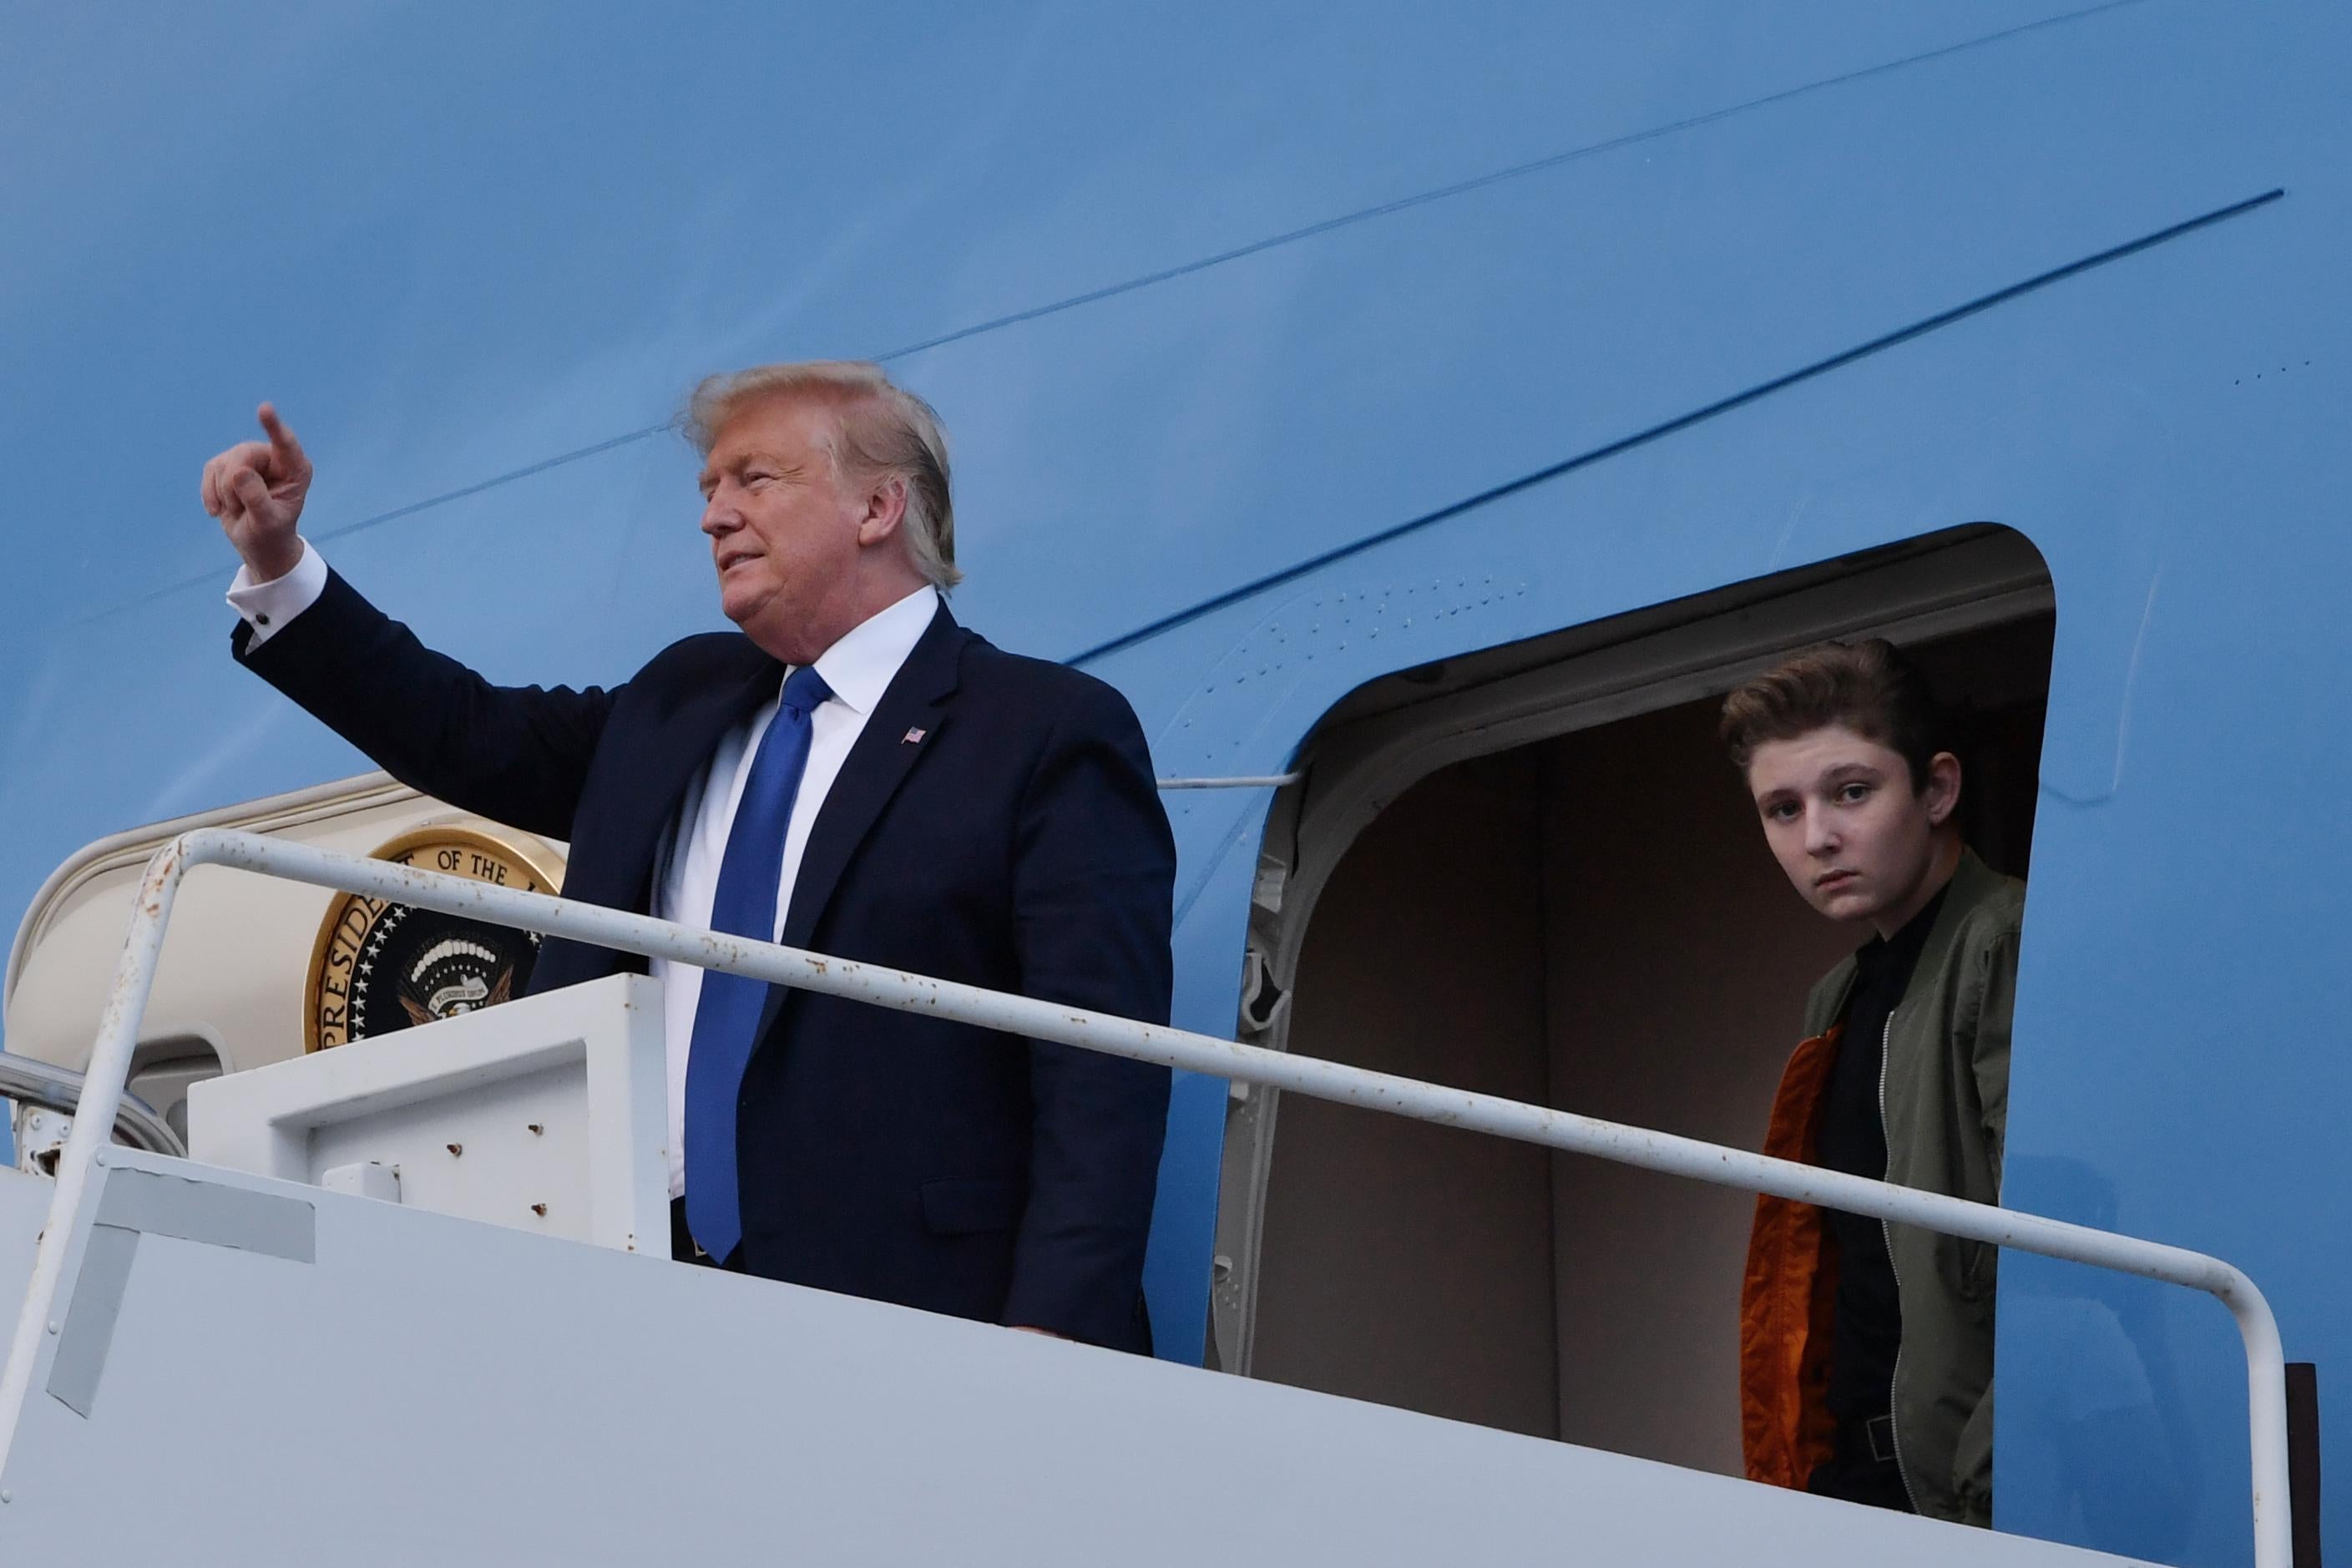 Rescue Barron Trump, the online rumor and meme about the president's son,  explained.